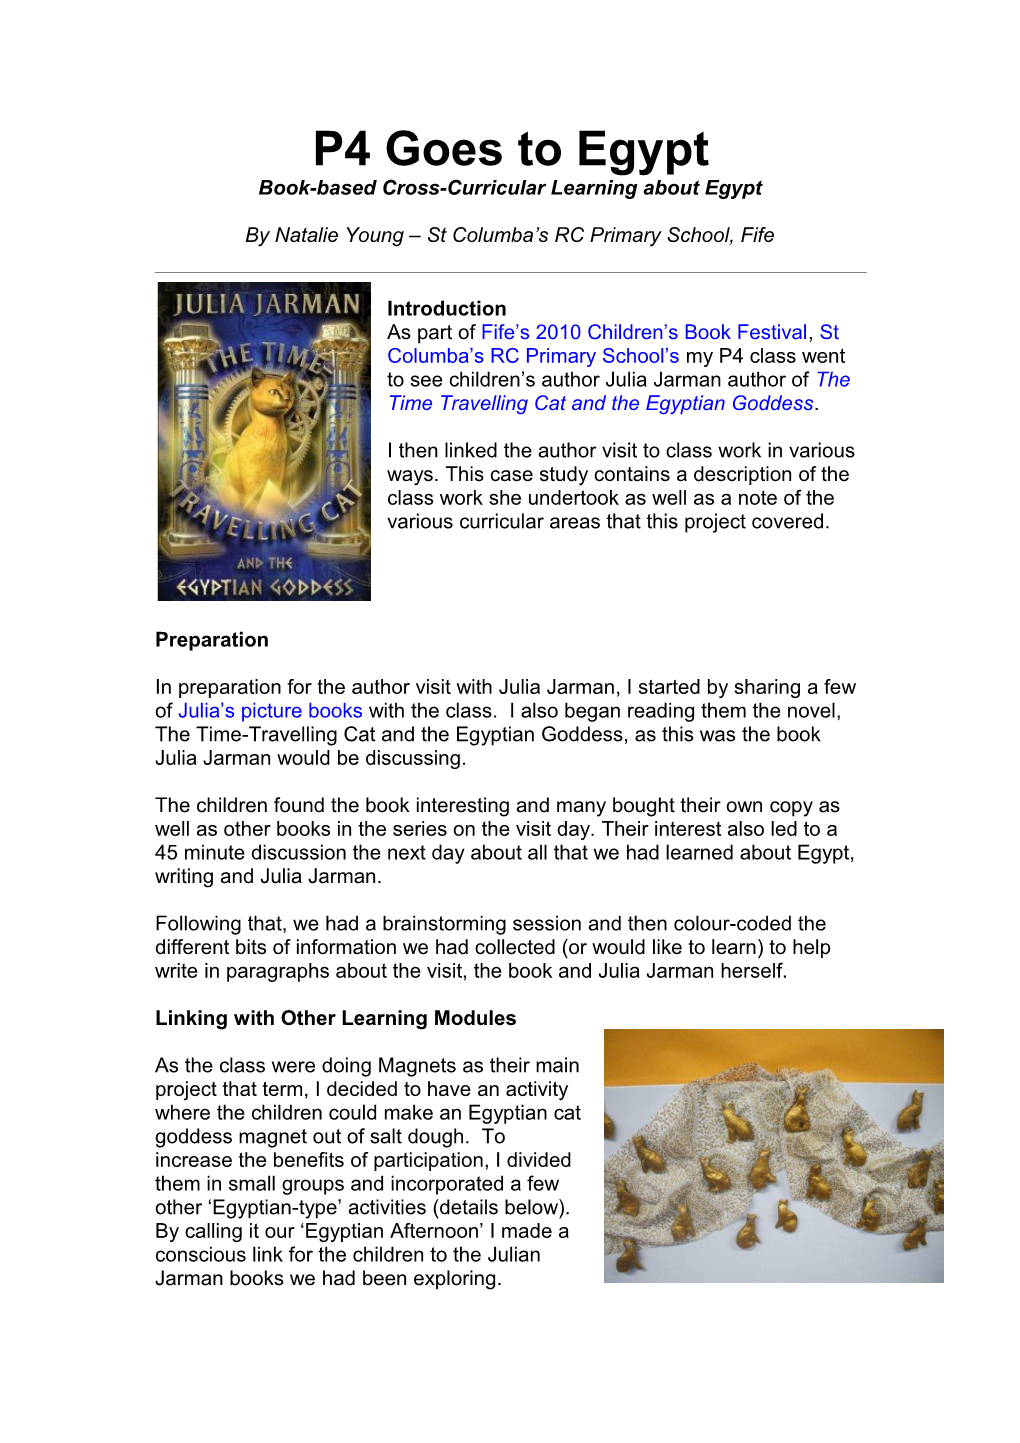 Book-Based Cross-Curricular Learning About Egypt